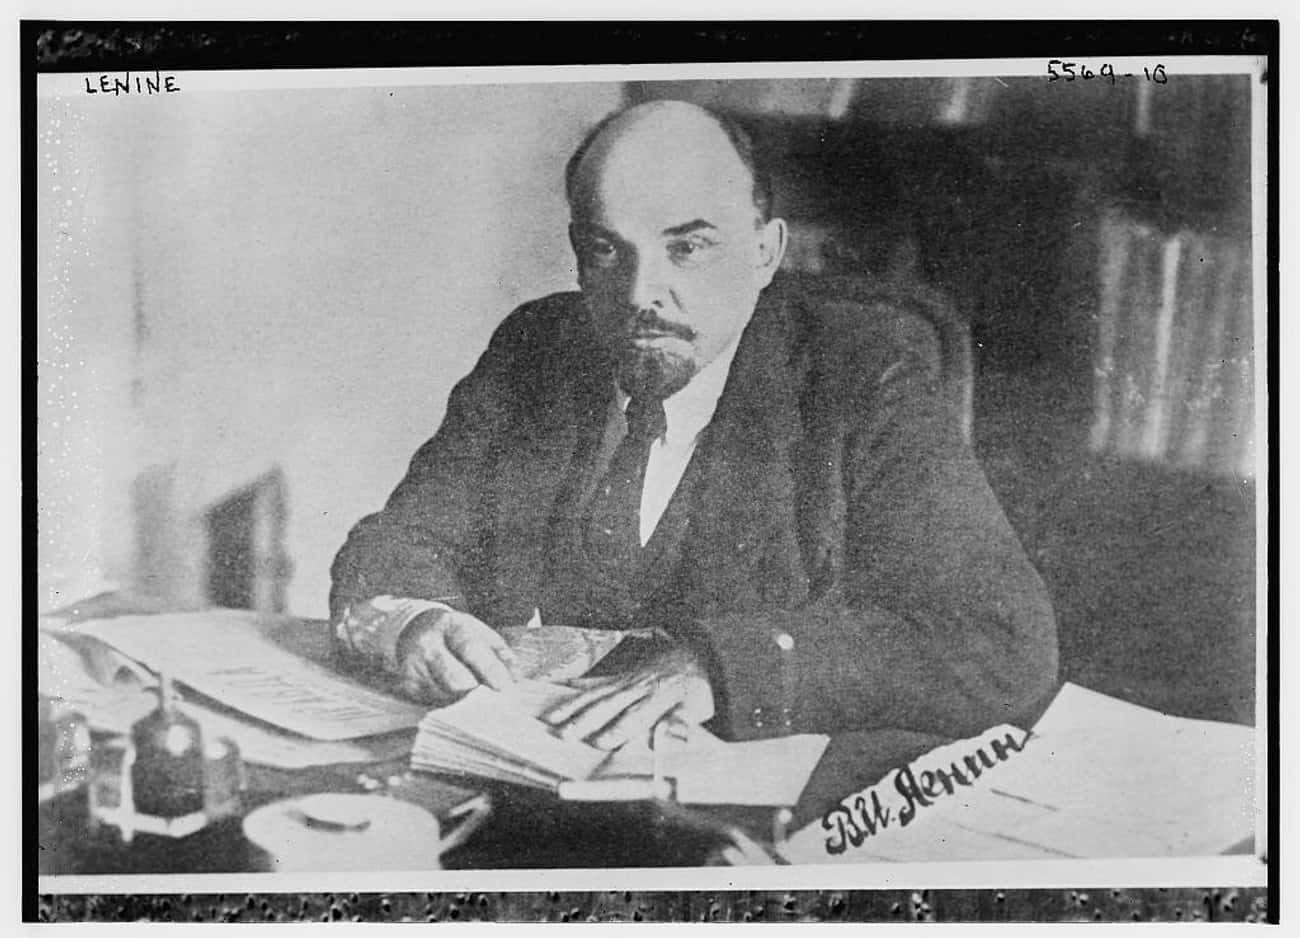 Vladimir Lenin Survived Being Shot Twice, Setting The Stage For Communist Rule In Russia